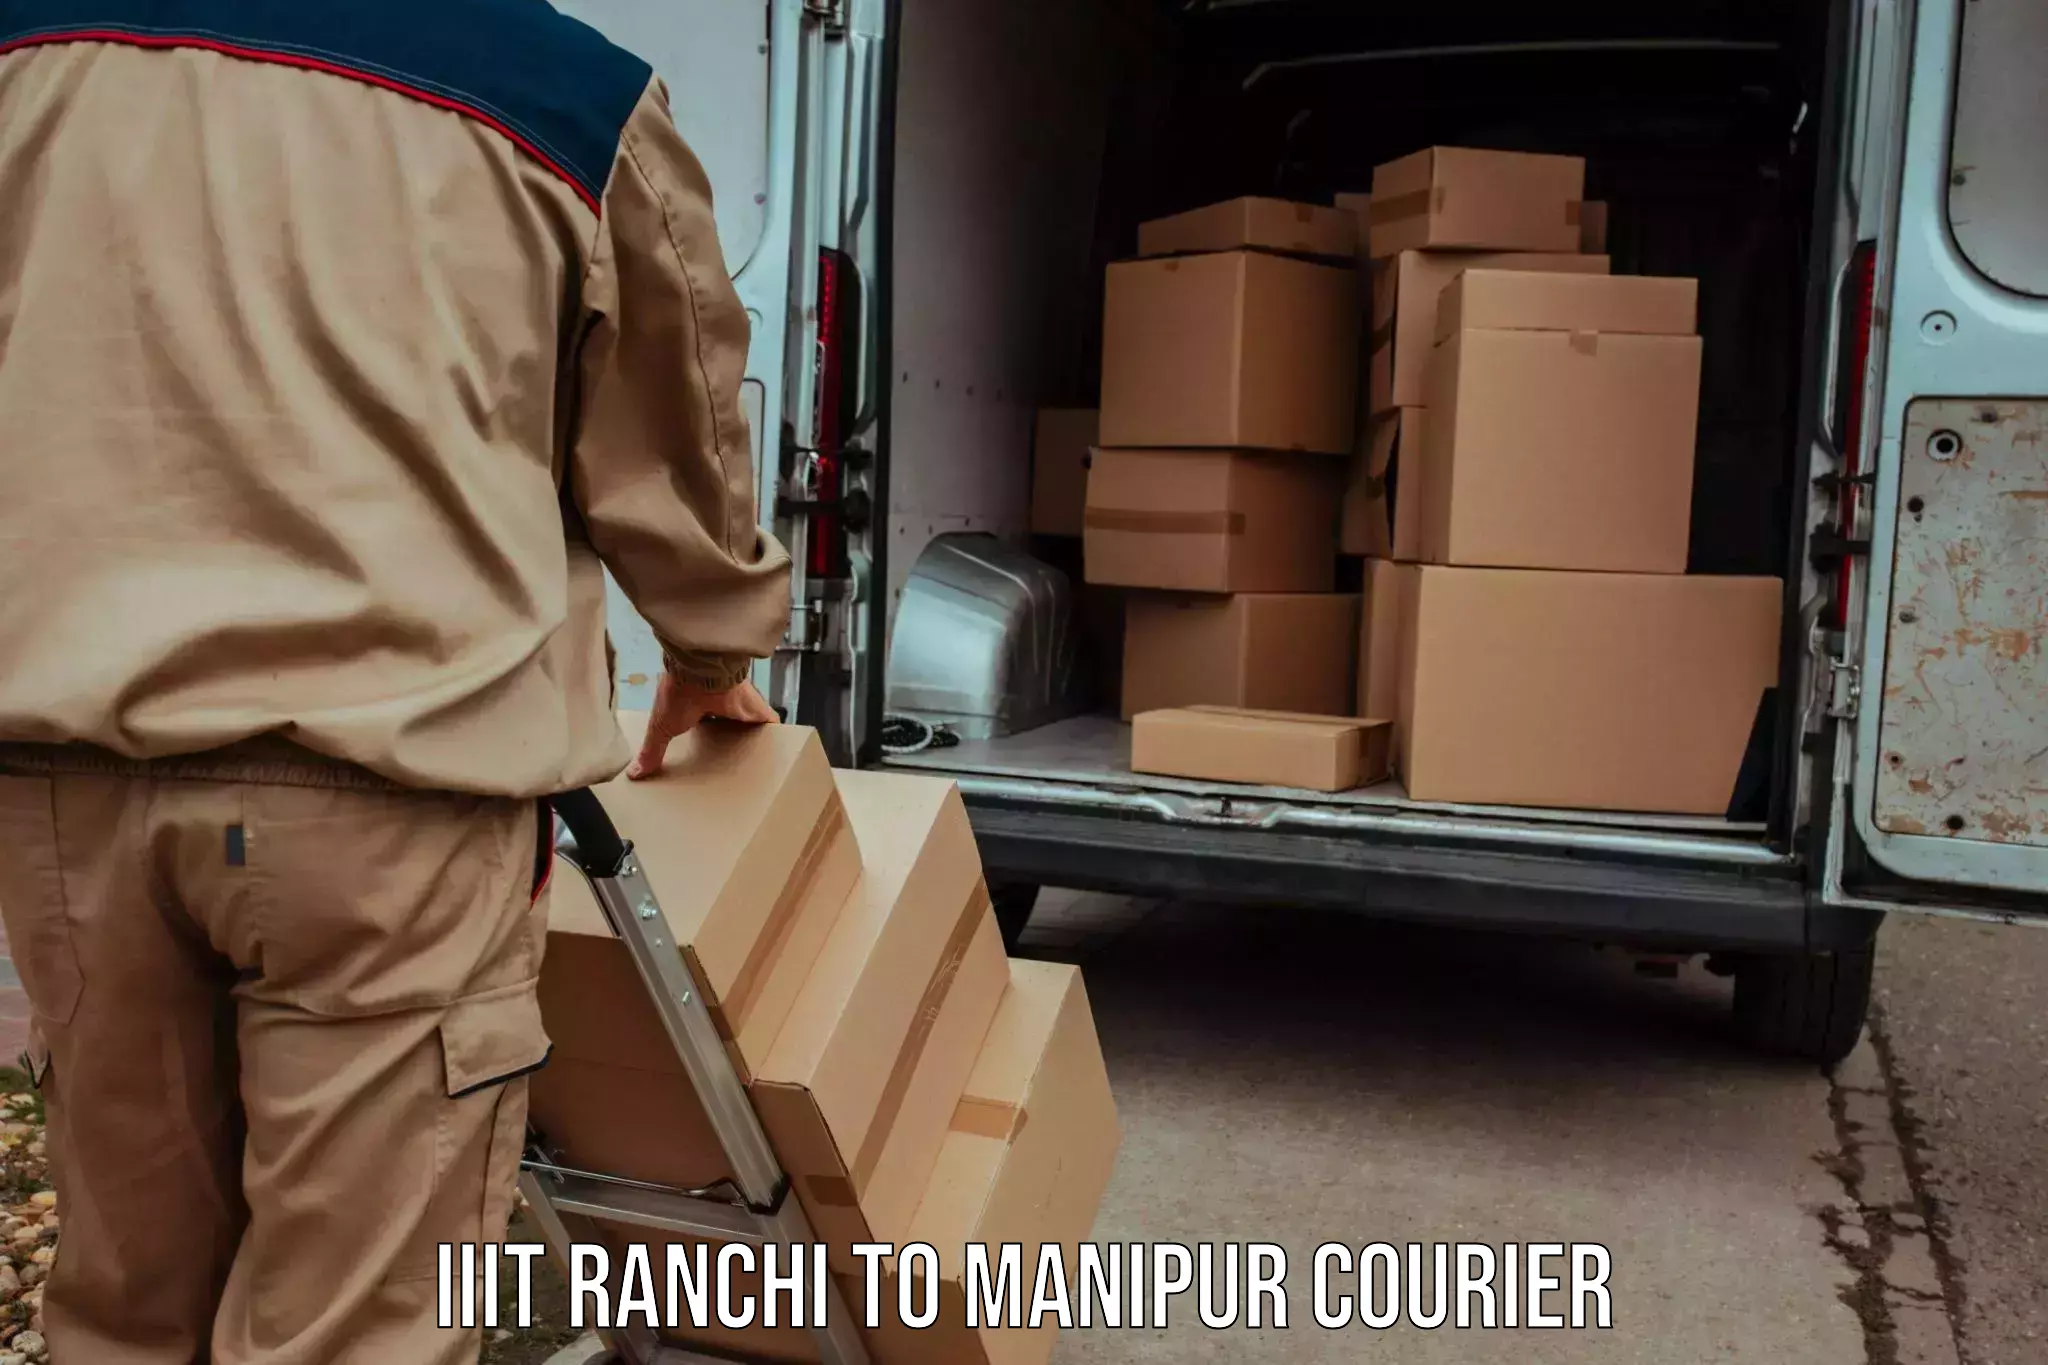 Quick dispatch service IIIT Ranchi to Imphal